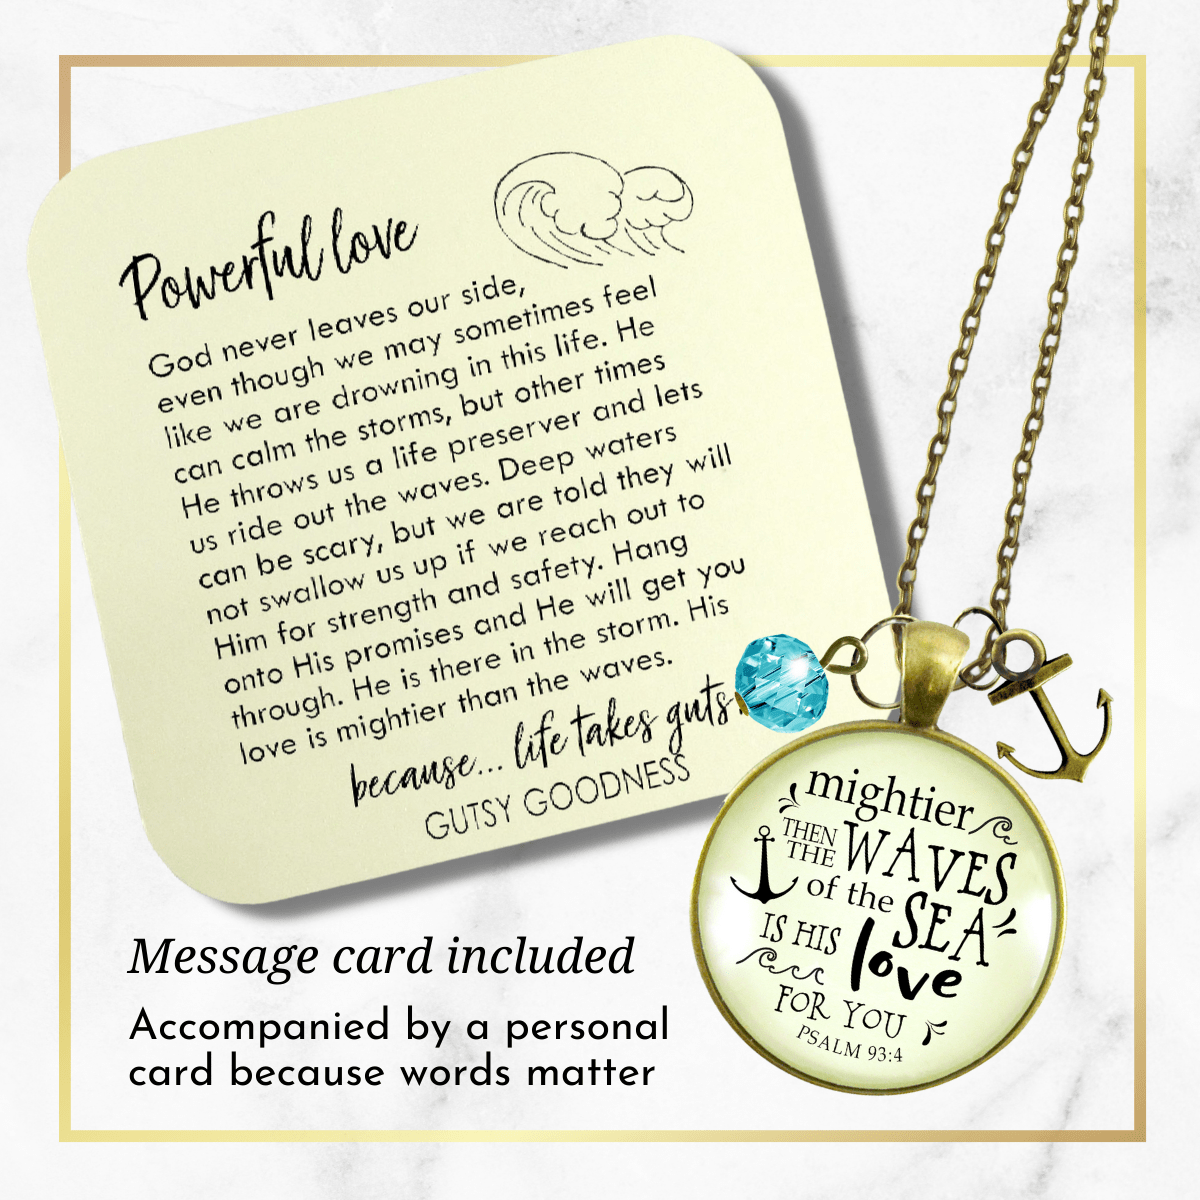 Gutsy Goodness Anchor Necklace Mightier Than Waves Bible Quote God's Love Jewelry - Gutsy Goodness Handmade Jewelry;Anchor Necklace Mightier Than Waves Bible Quote God's Love Jewelry - Gutsy Goodness Handmade Jewelry Gifts